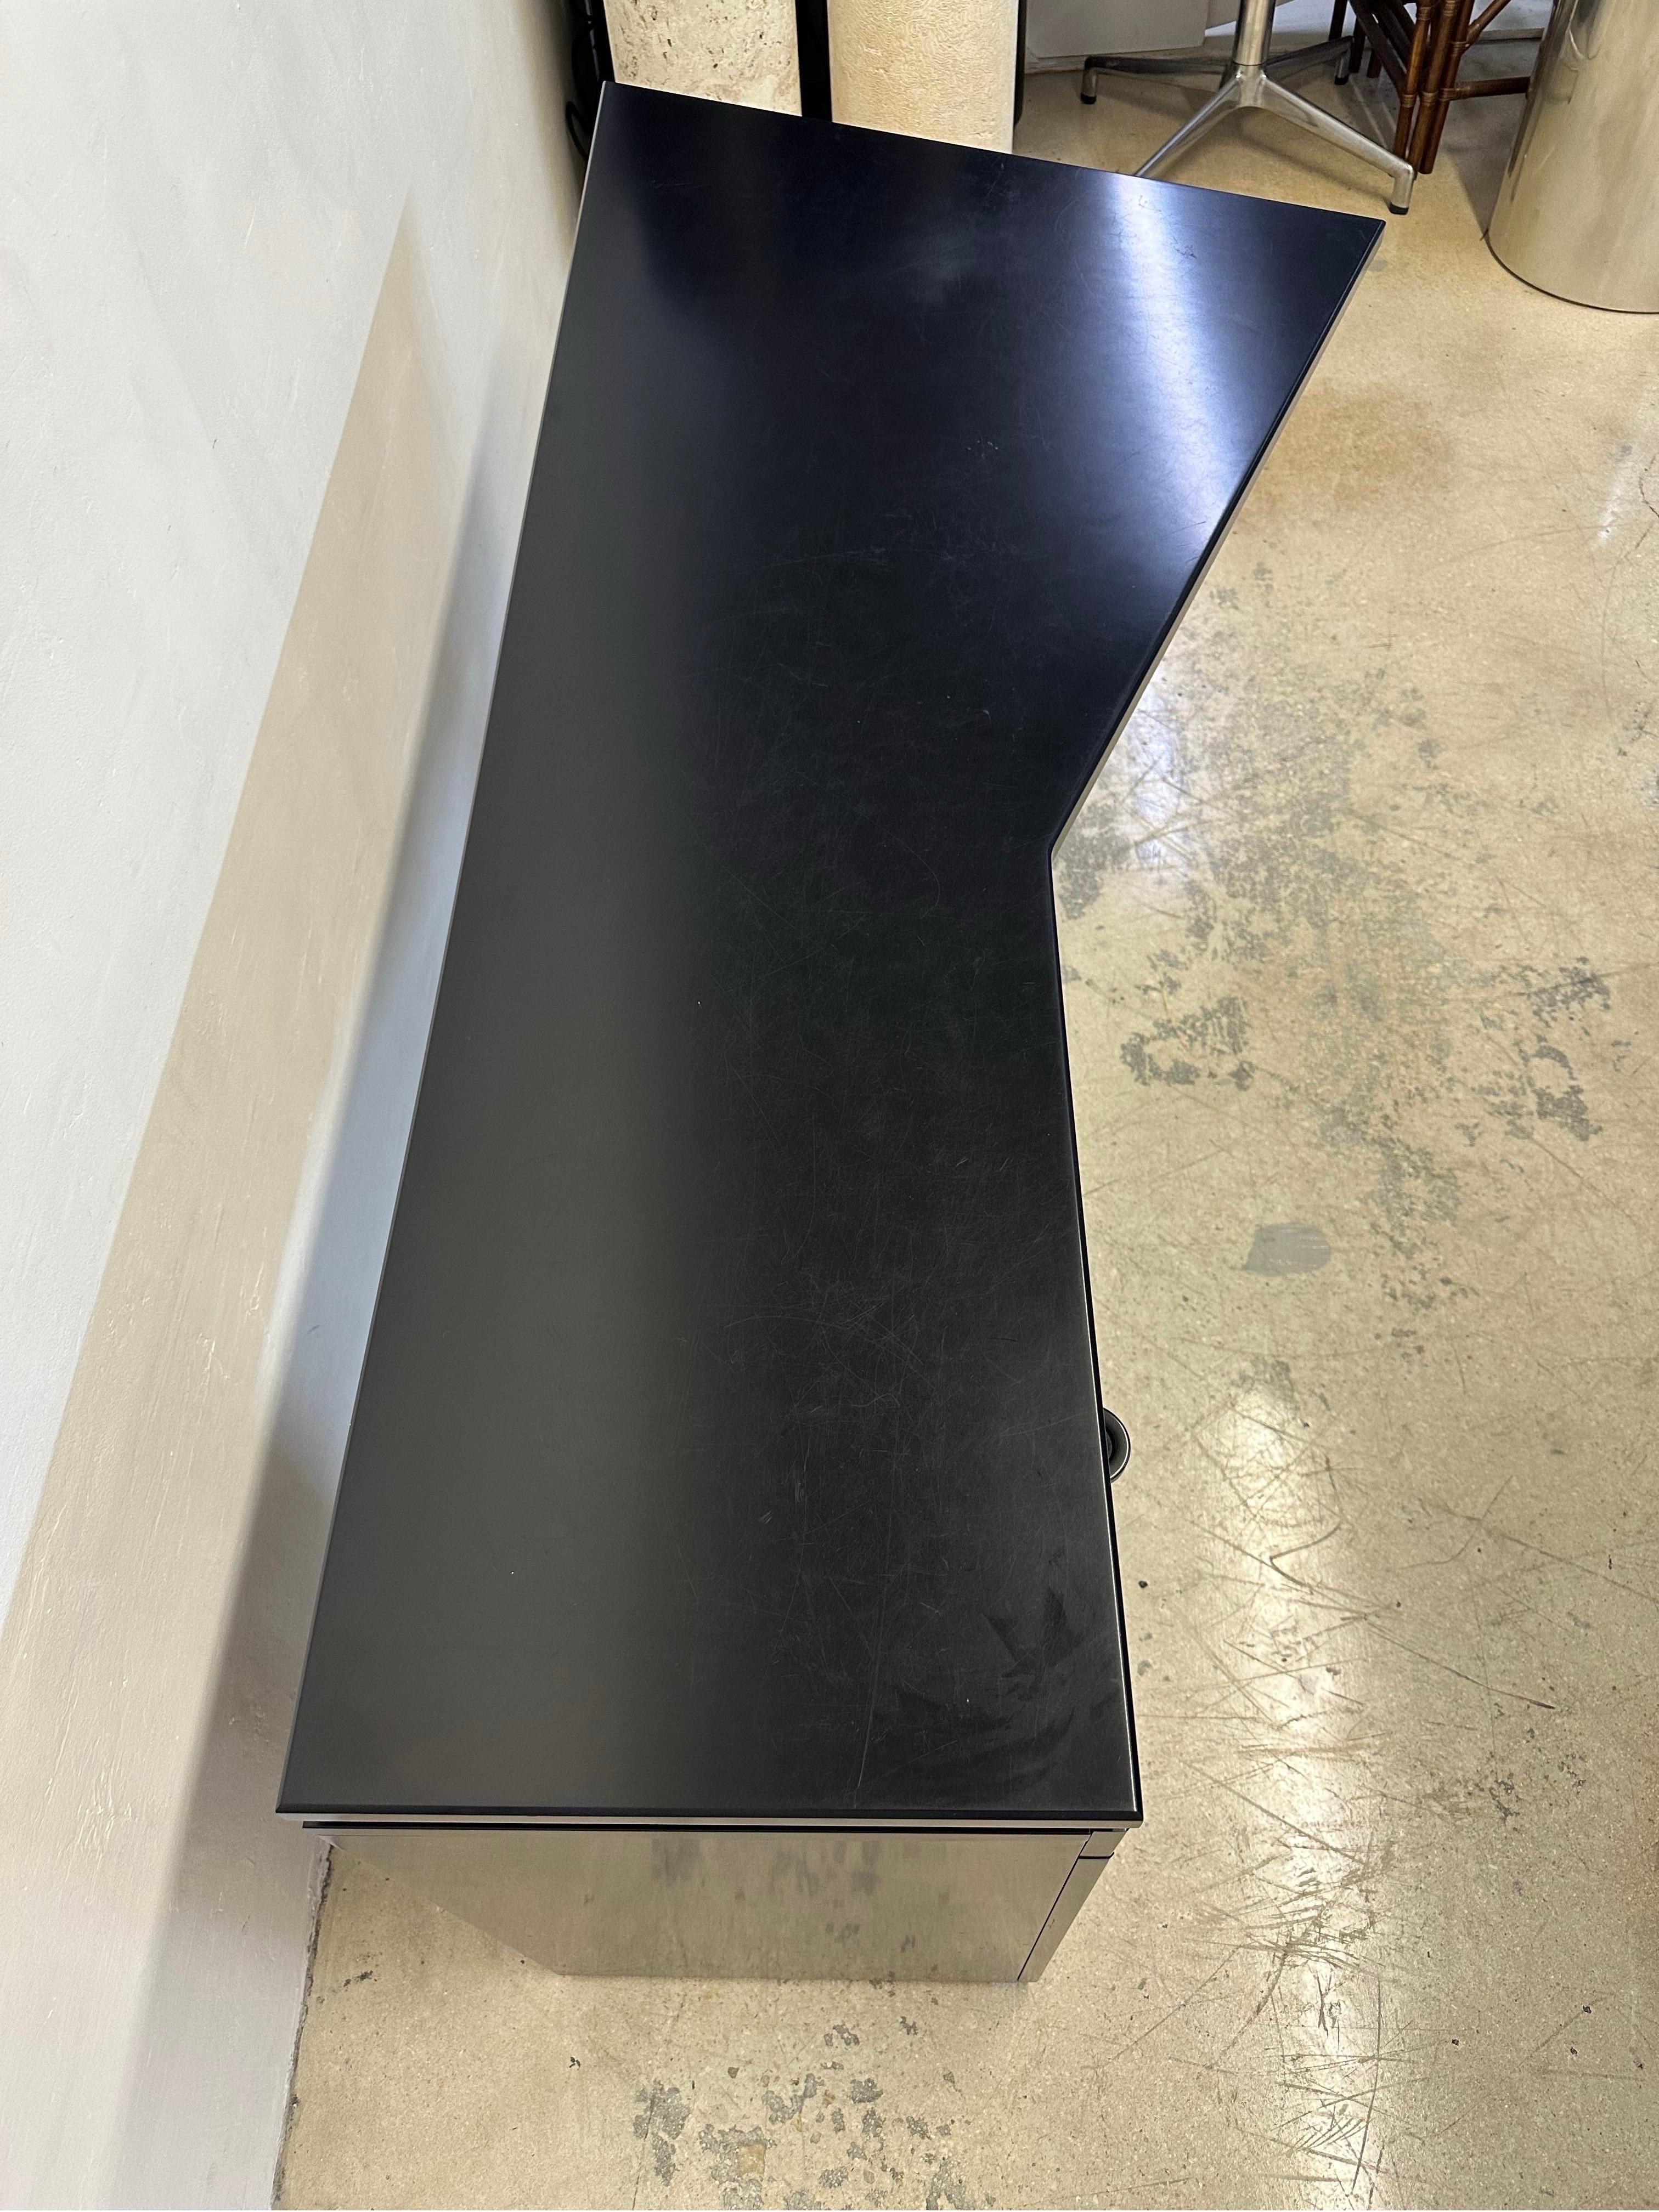 Postmodern Black Lacquered Desk by Interlubke, Germany 1980s For Sale 5